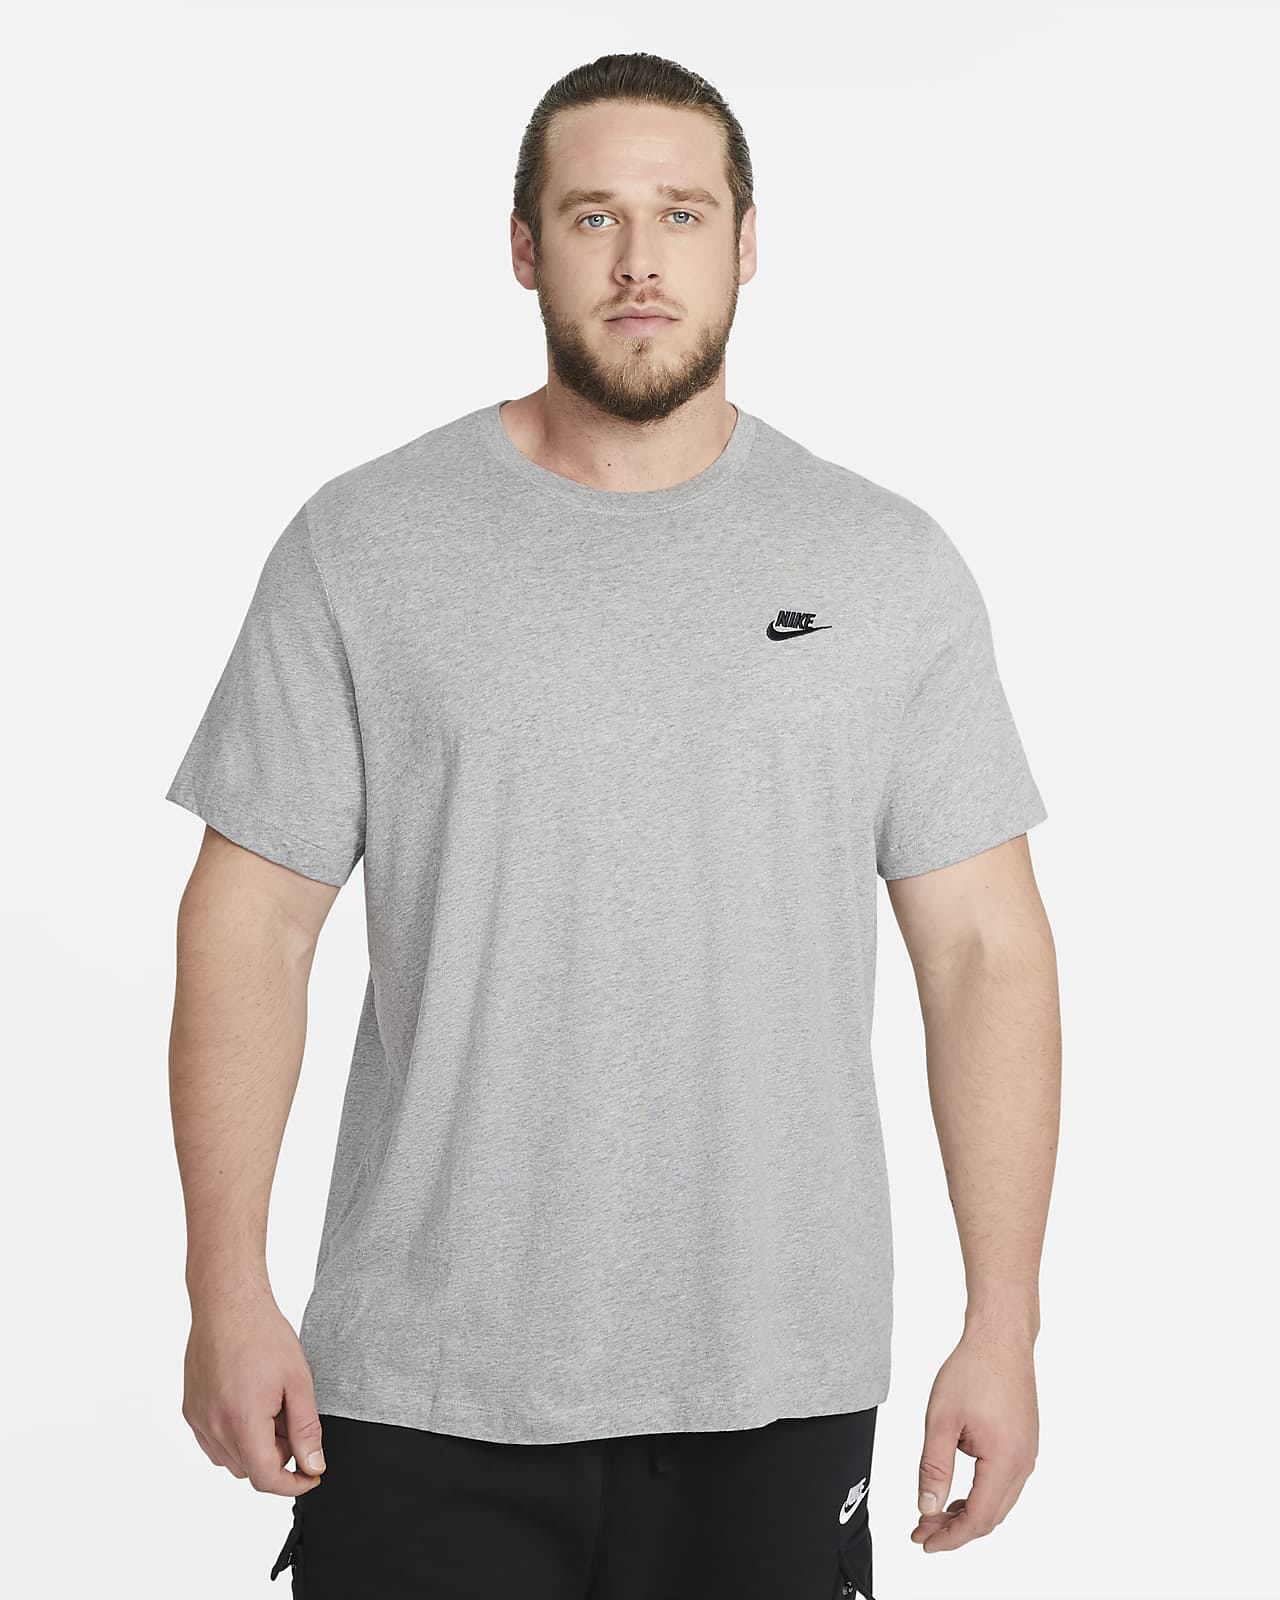 Best golf t-shirts 2022: GOLF's selection for sleek and trendy men's t ...